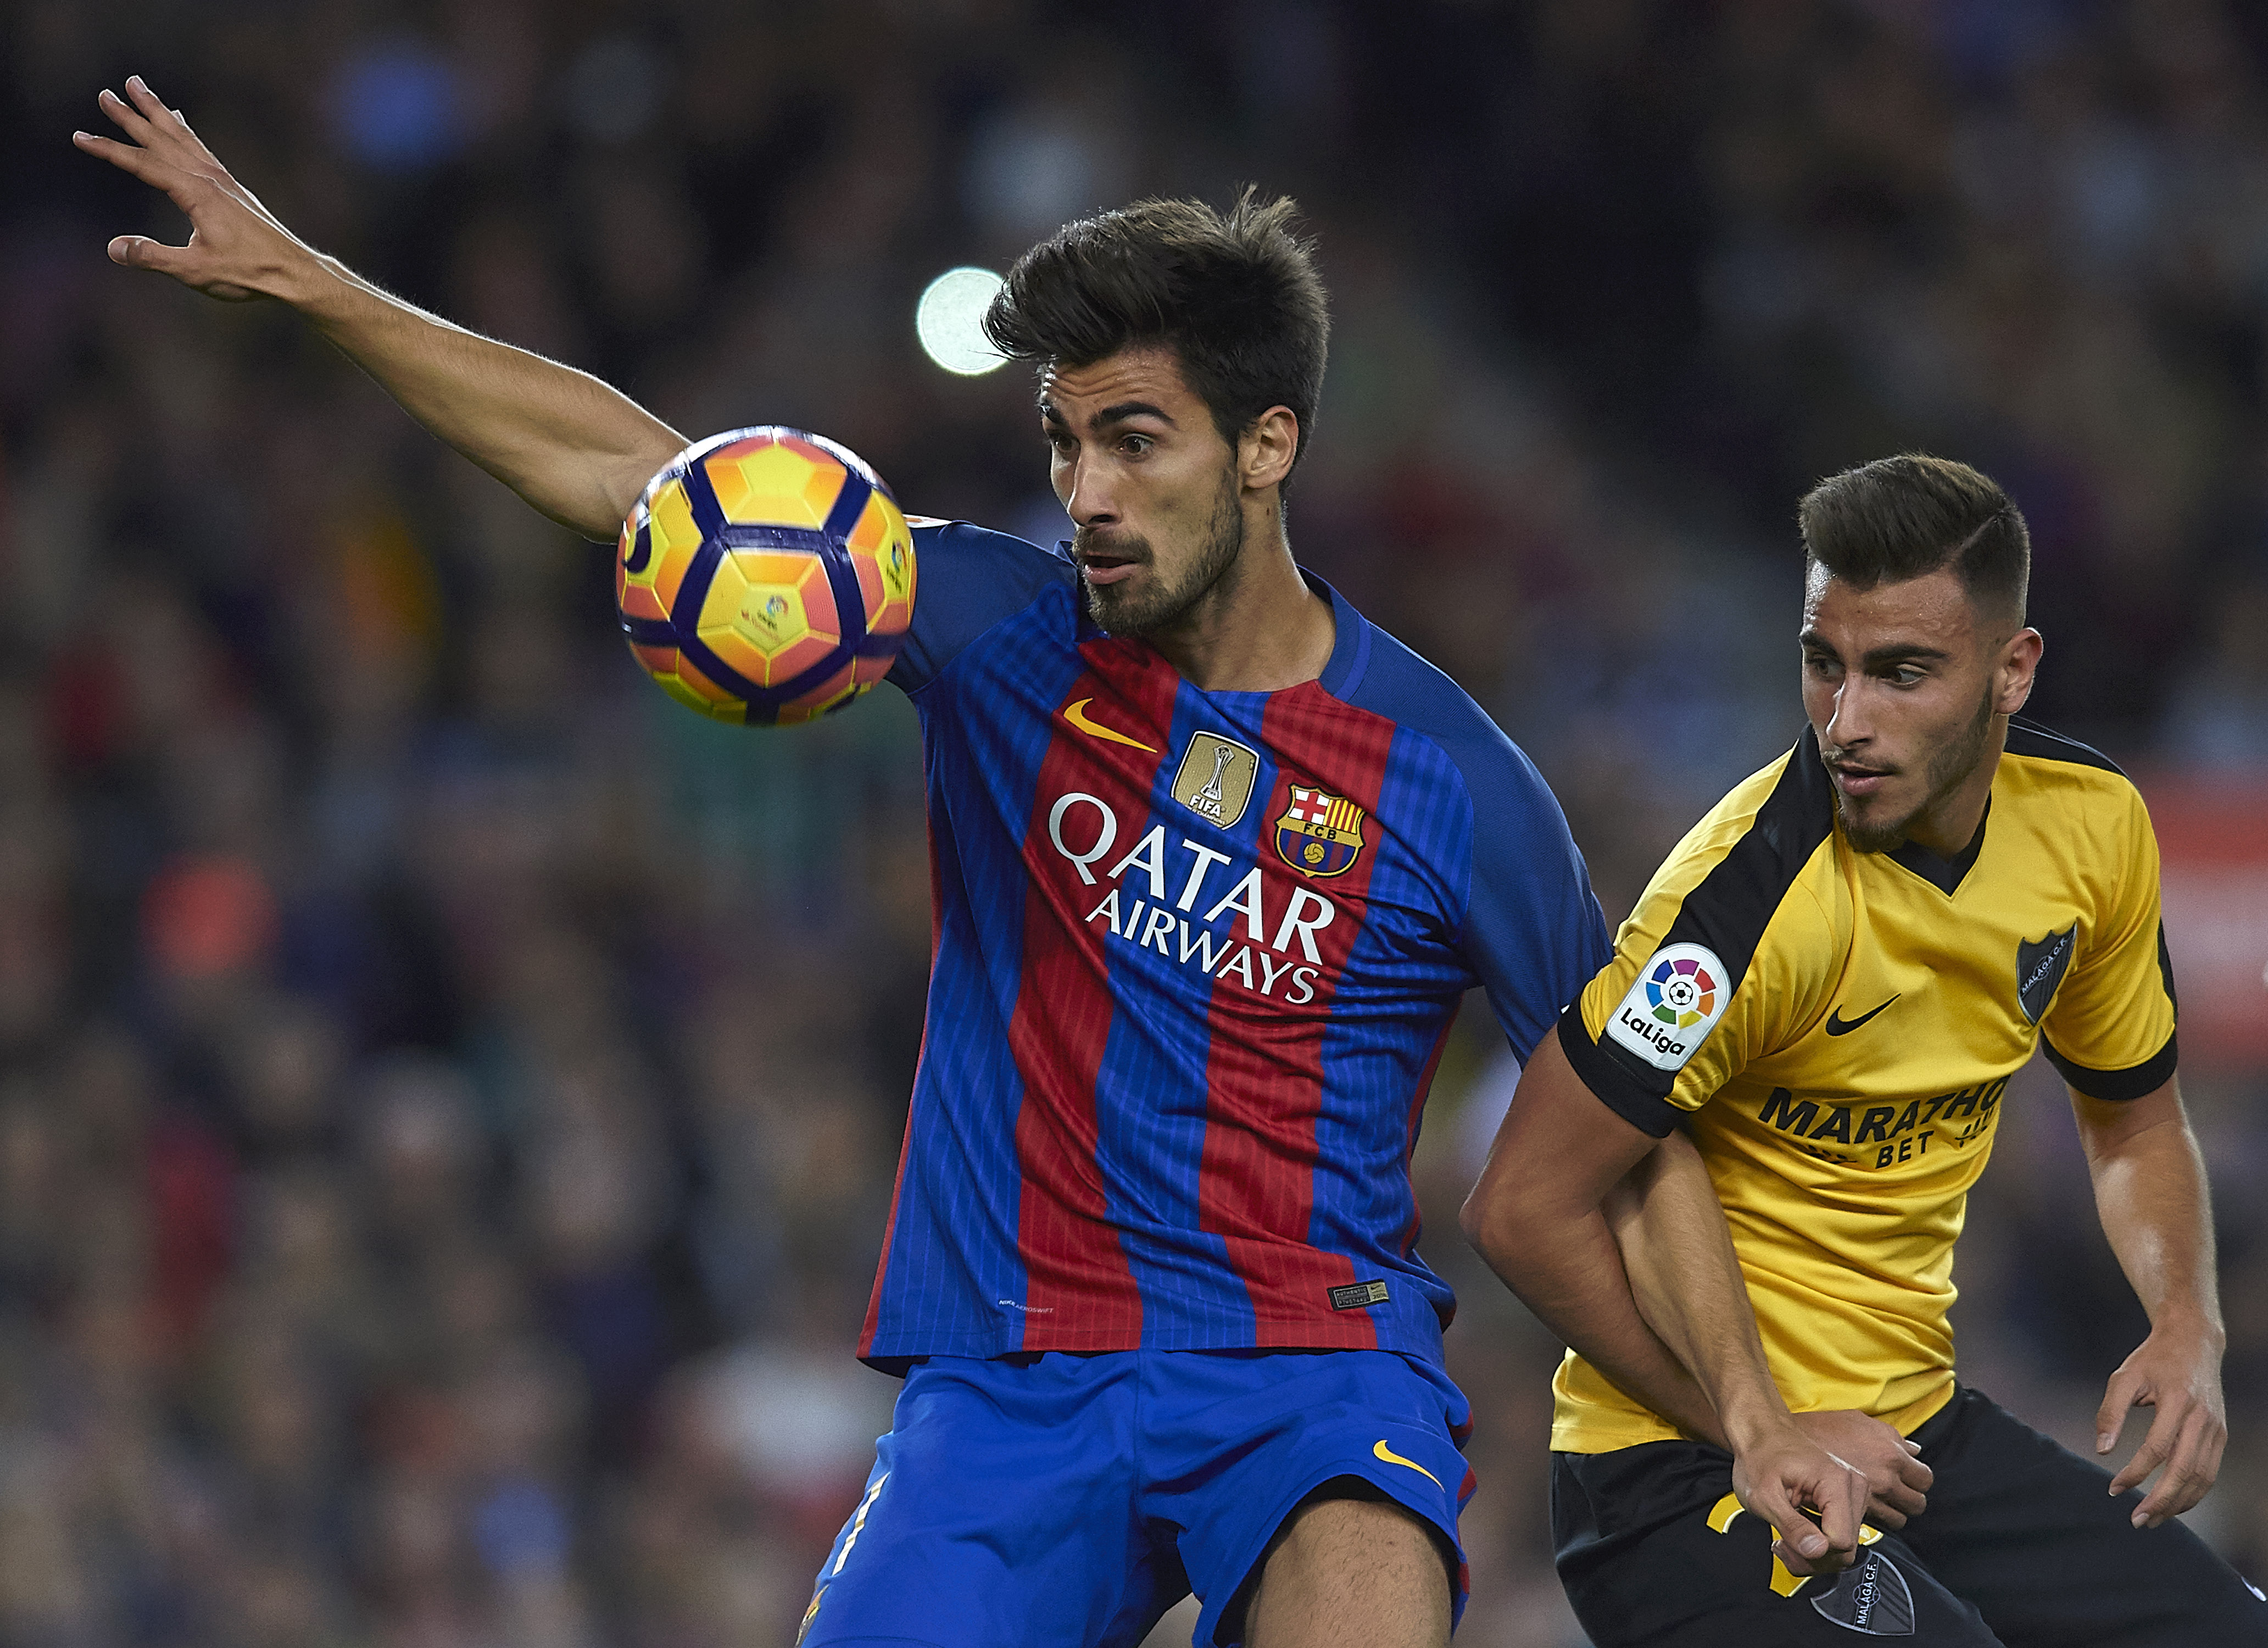 BARCELONA, SPAIN - NOVEMBER 19:  Andre Gomes of Barcelona competes for the ball with Juankar (R) of Malaga during the La Liga match between FC Barcelona and Malaga CF at Camp Nou stadium on November 19, 2016 in Barcelona, Spain.  (Photo by Manuel Queimadelos Alonso/Getty Images)